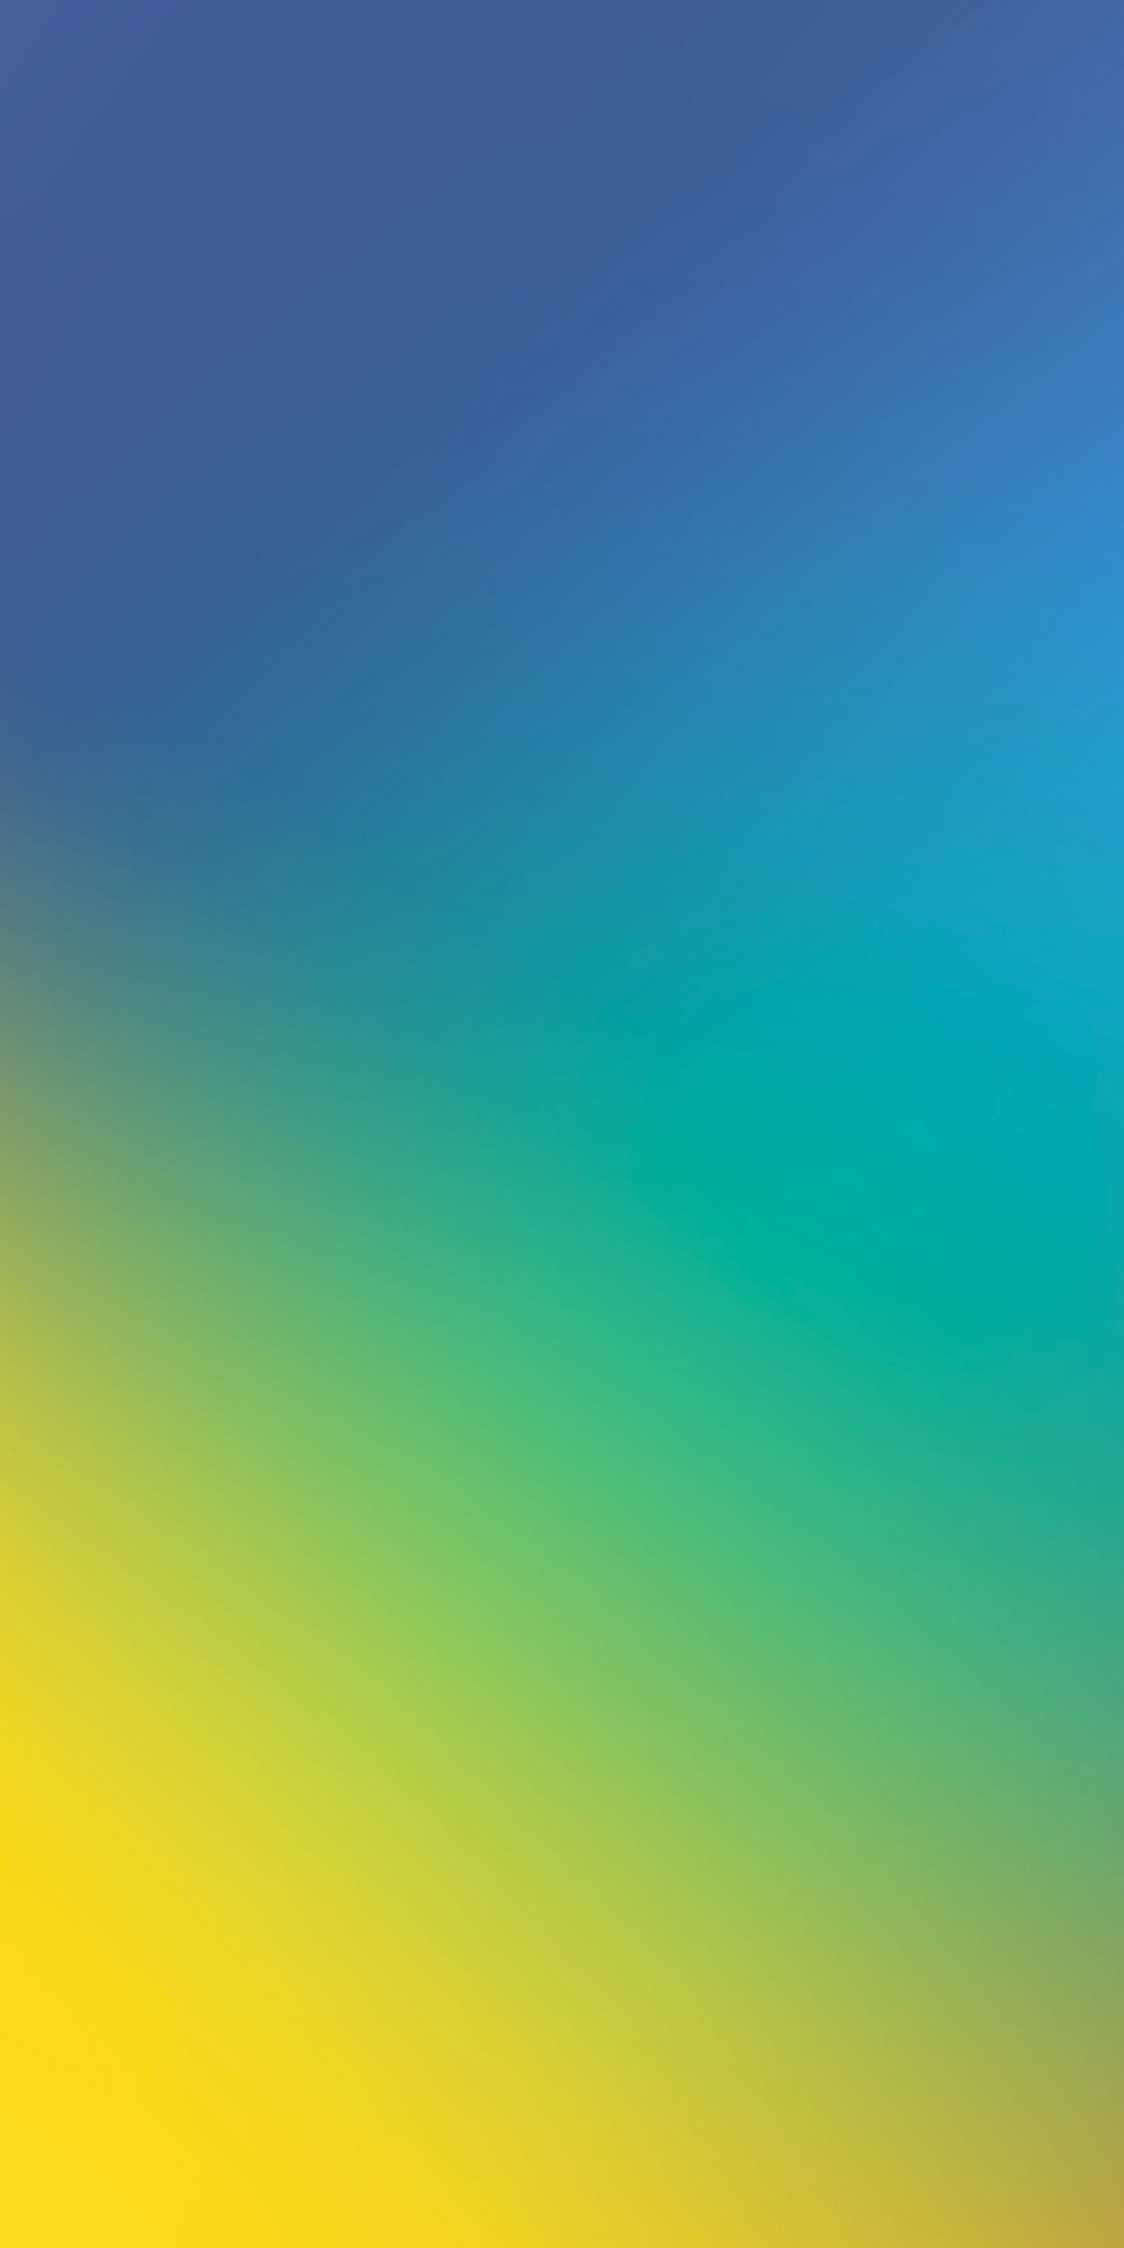 Blue and Yellow Gradient Background iPhone Wallpaper. iPhone wallpaper gradient, iPhone wallpaper yellow, iPhone background